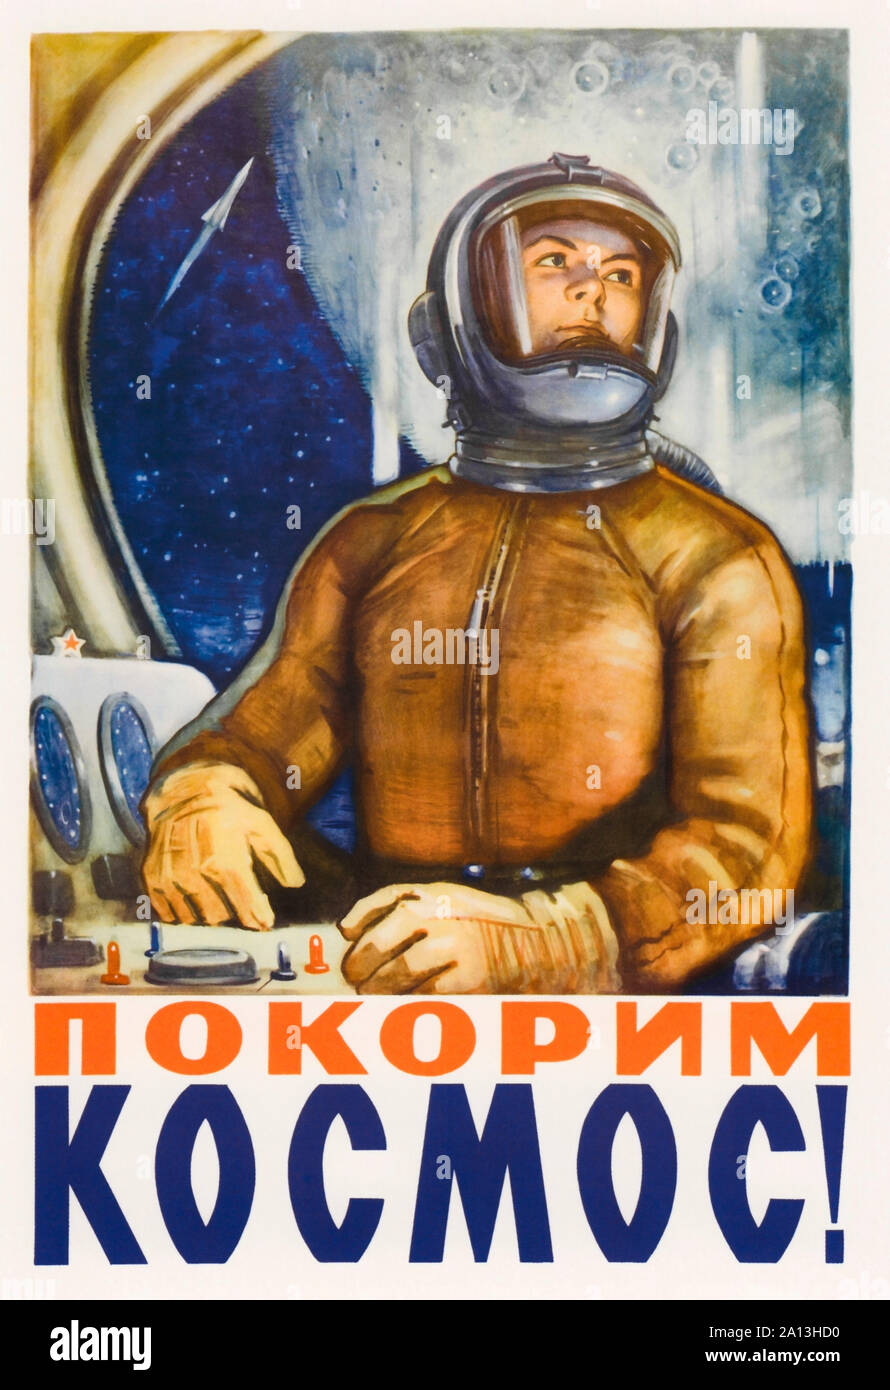 Russian space propaganda poster of a cosmonaut in a space capsule. Stock Photo